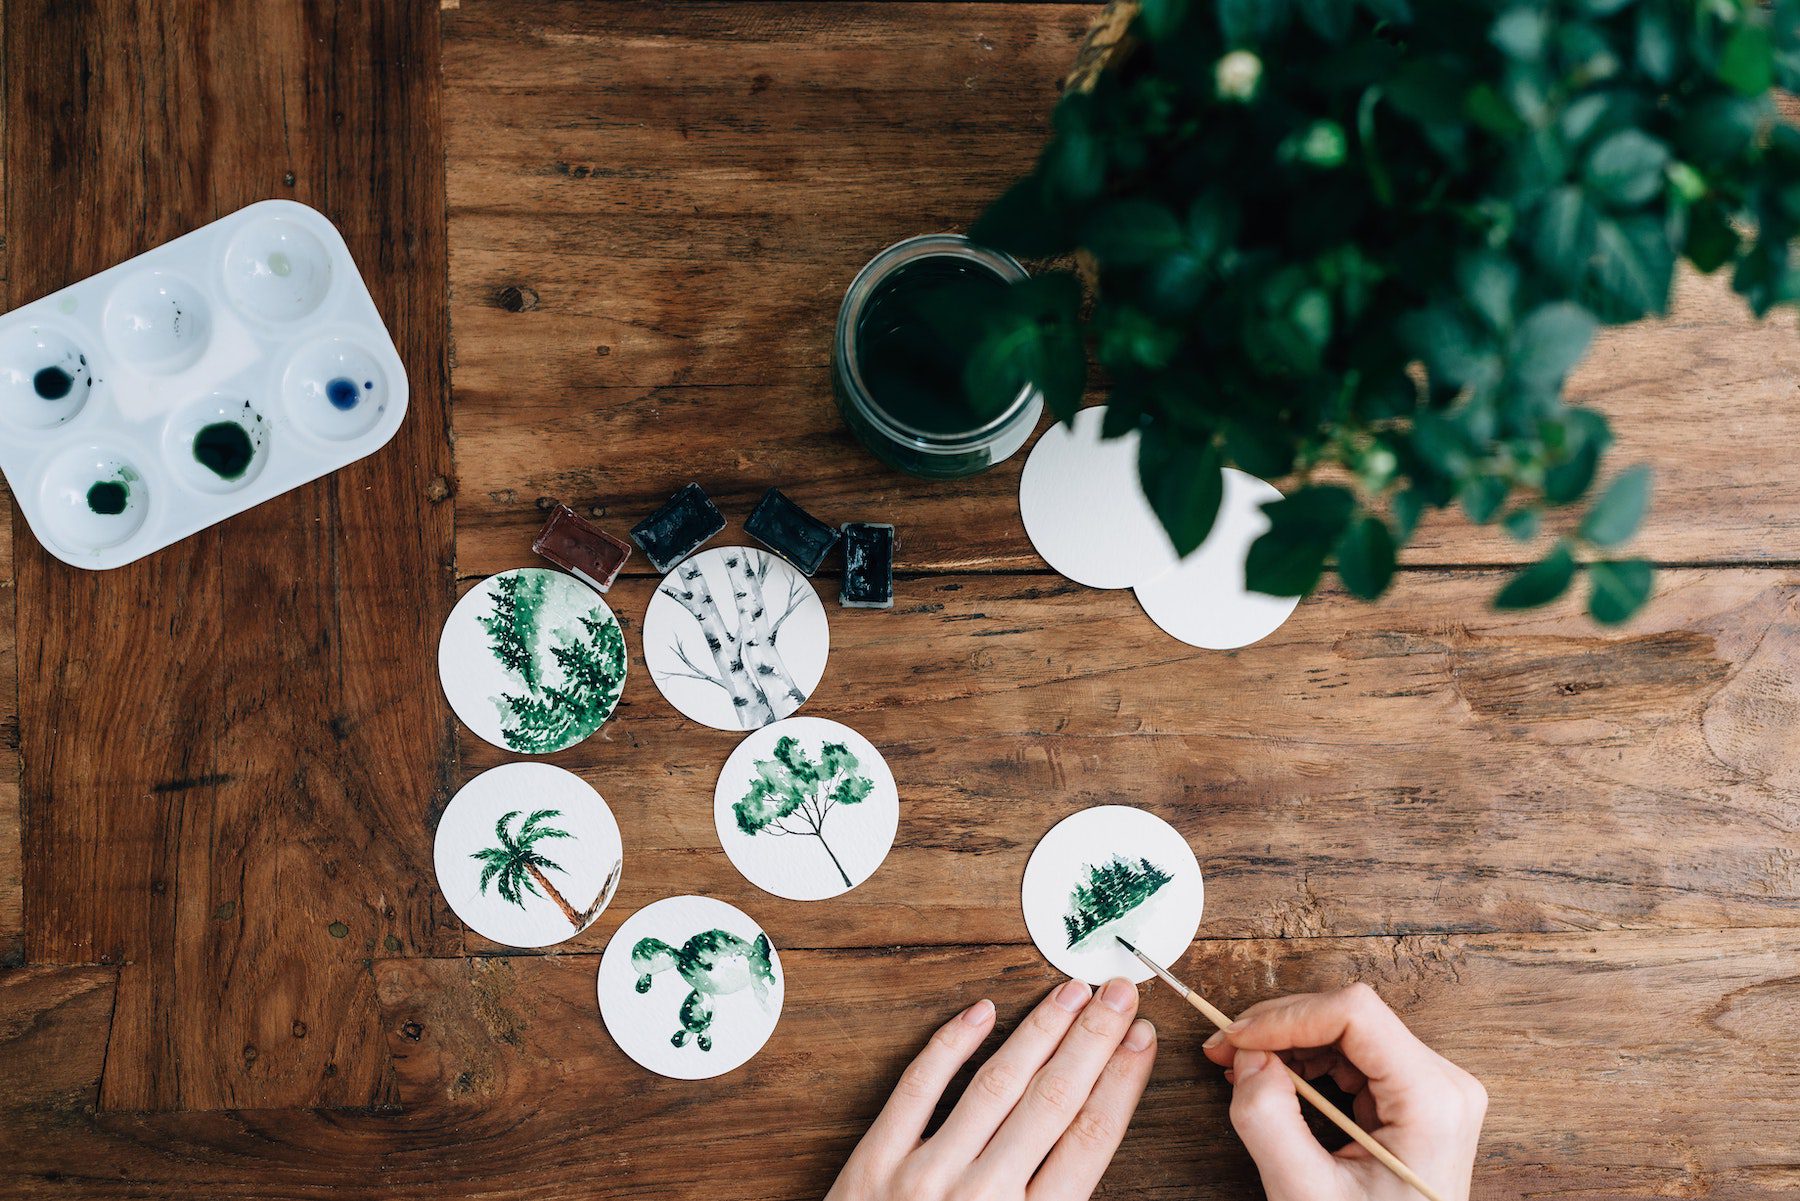 An artist paints plants, trees, and other greenery on coaster sized canvases atop a large wooden table